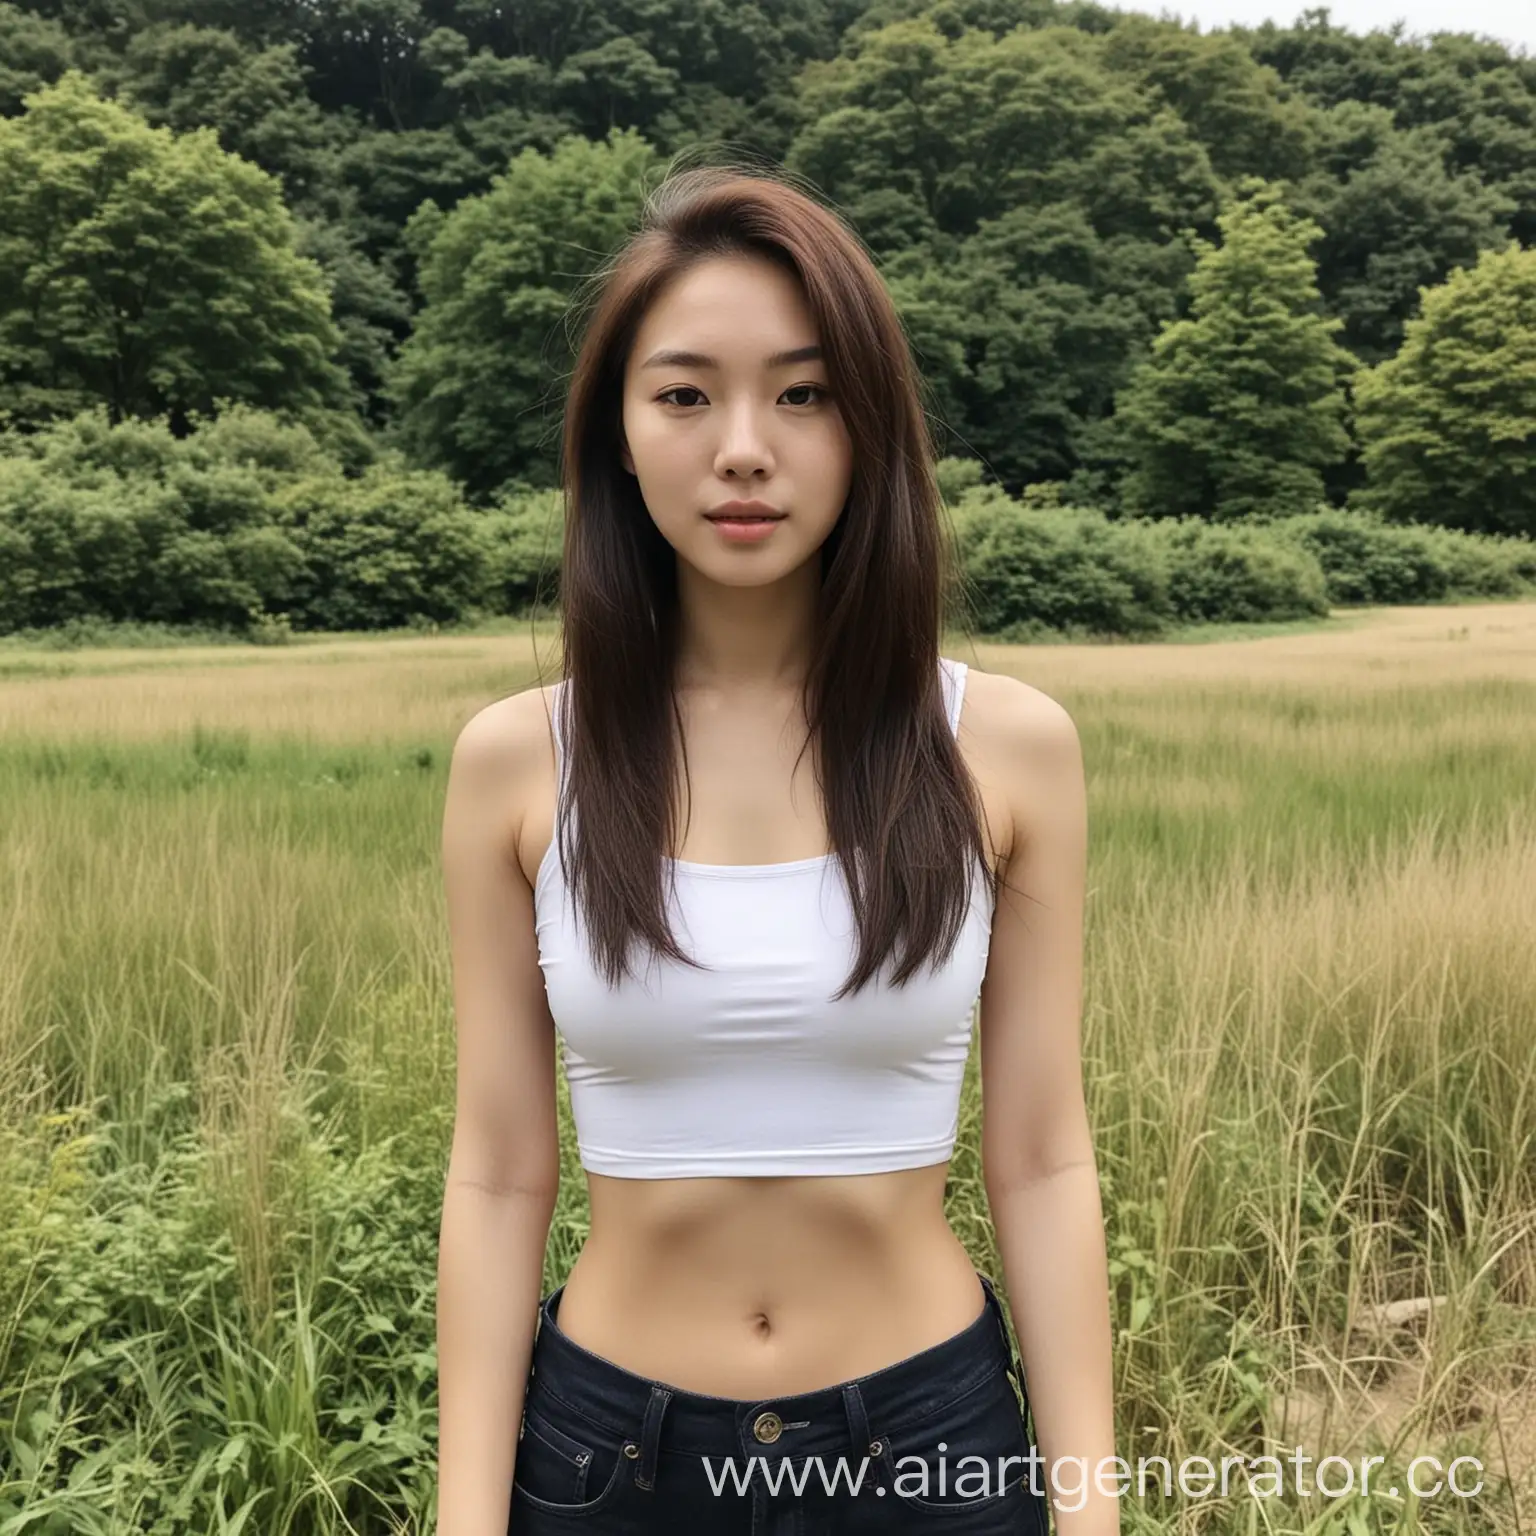 Realistic-iPhone-Photo-of-KoreanCaucasian-Woman-with-Fit-Physique-in-UK-Landscape